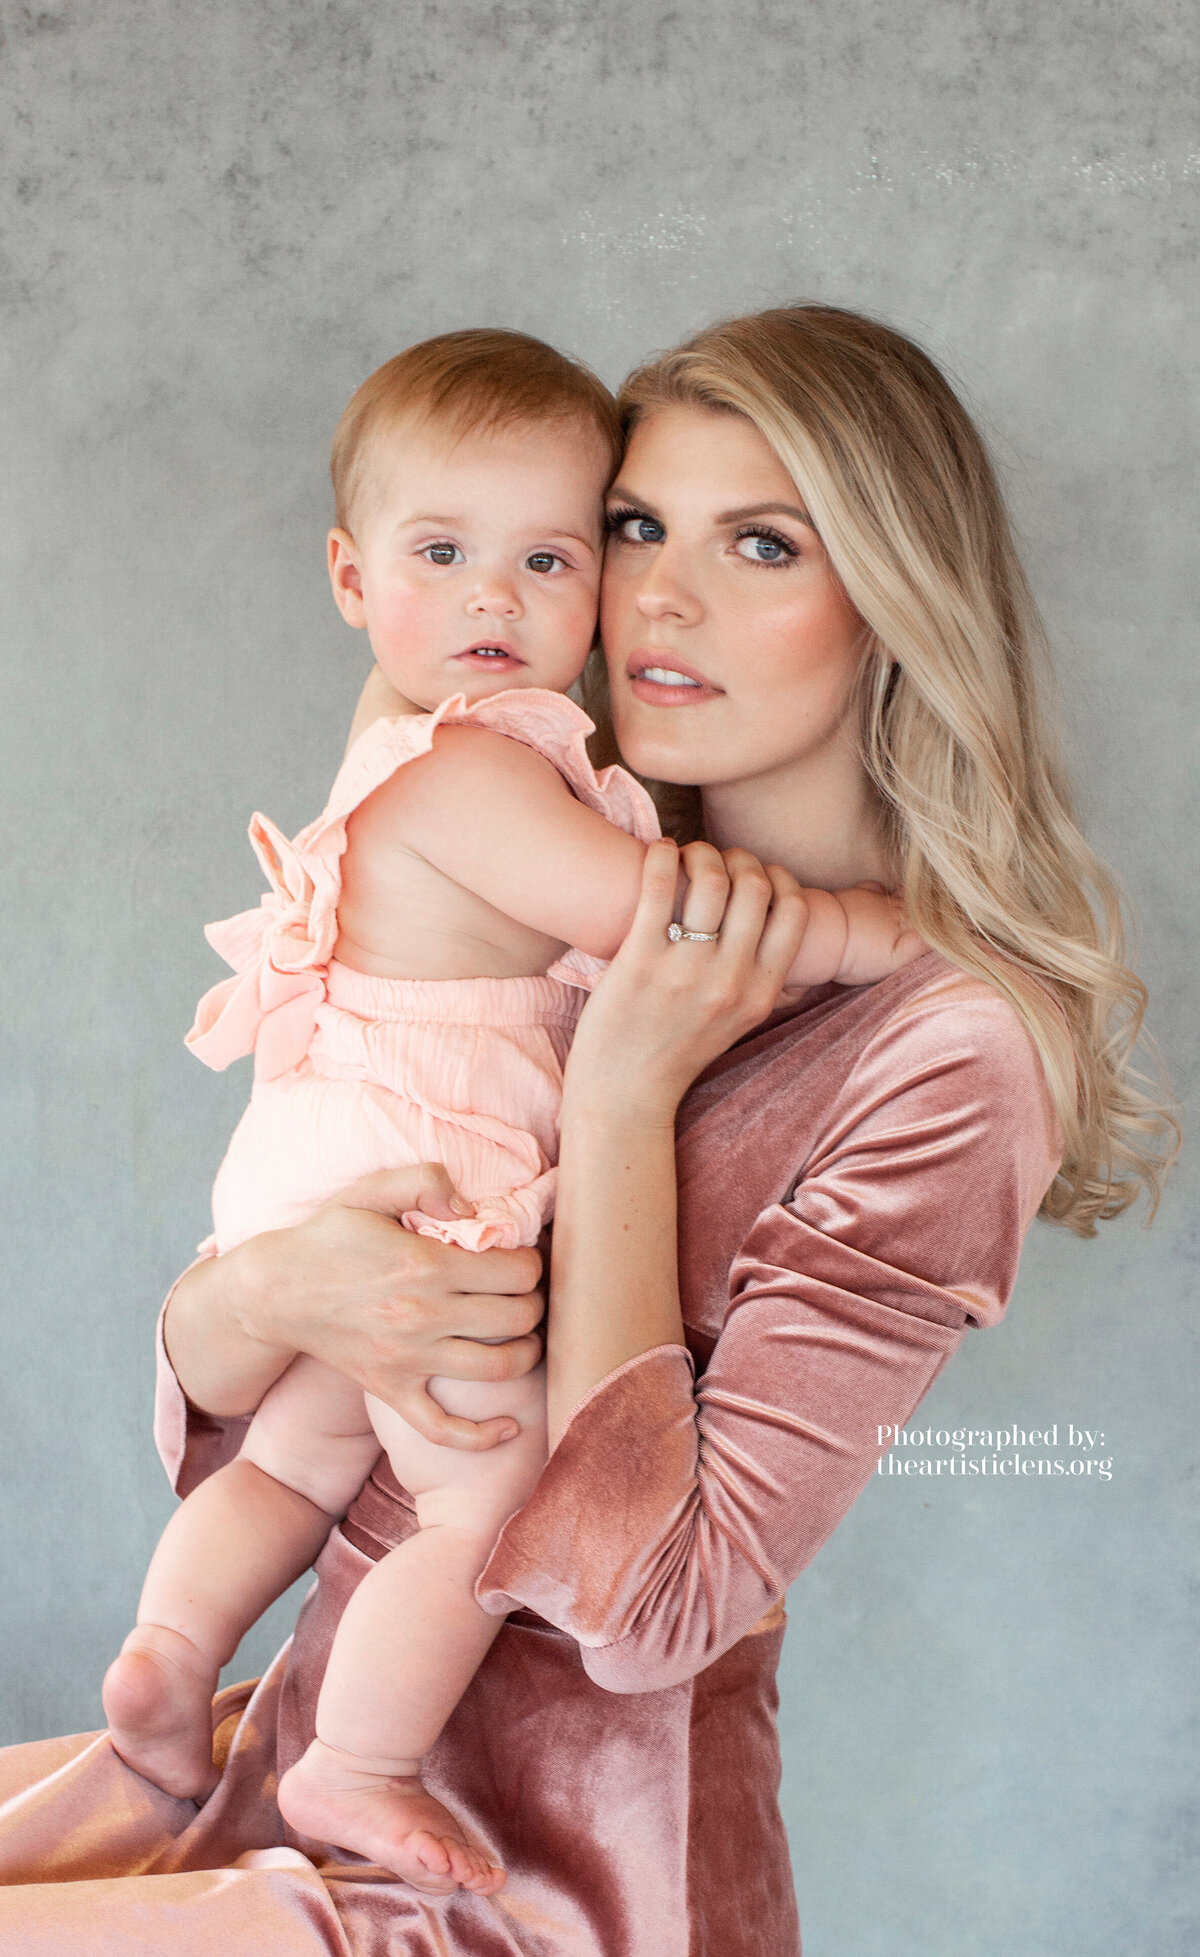 Mother and daughter portrait photographed on a hand painted canvas backdrop that is warm teal in color